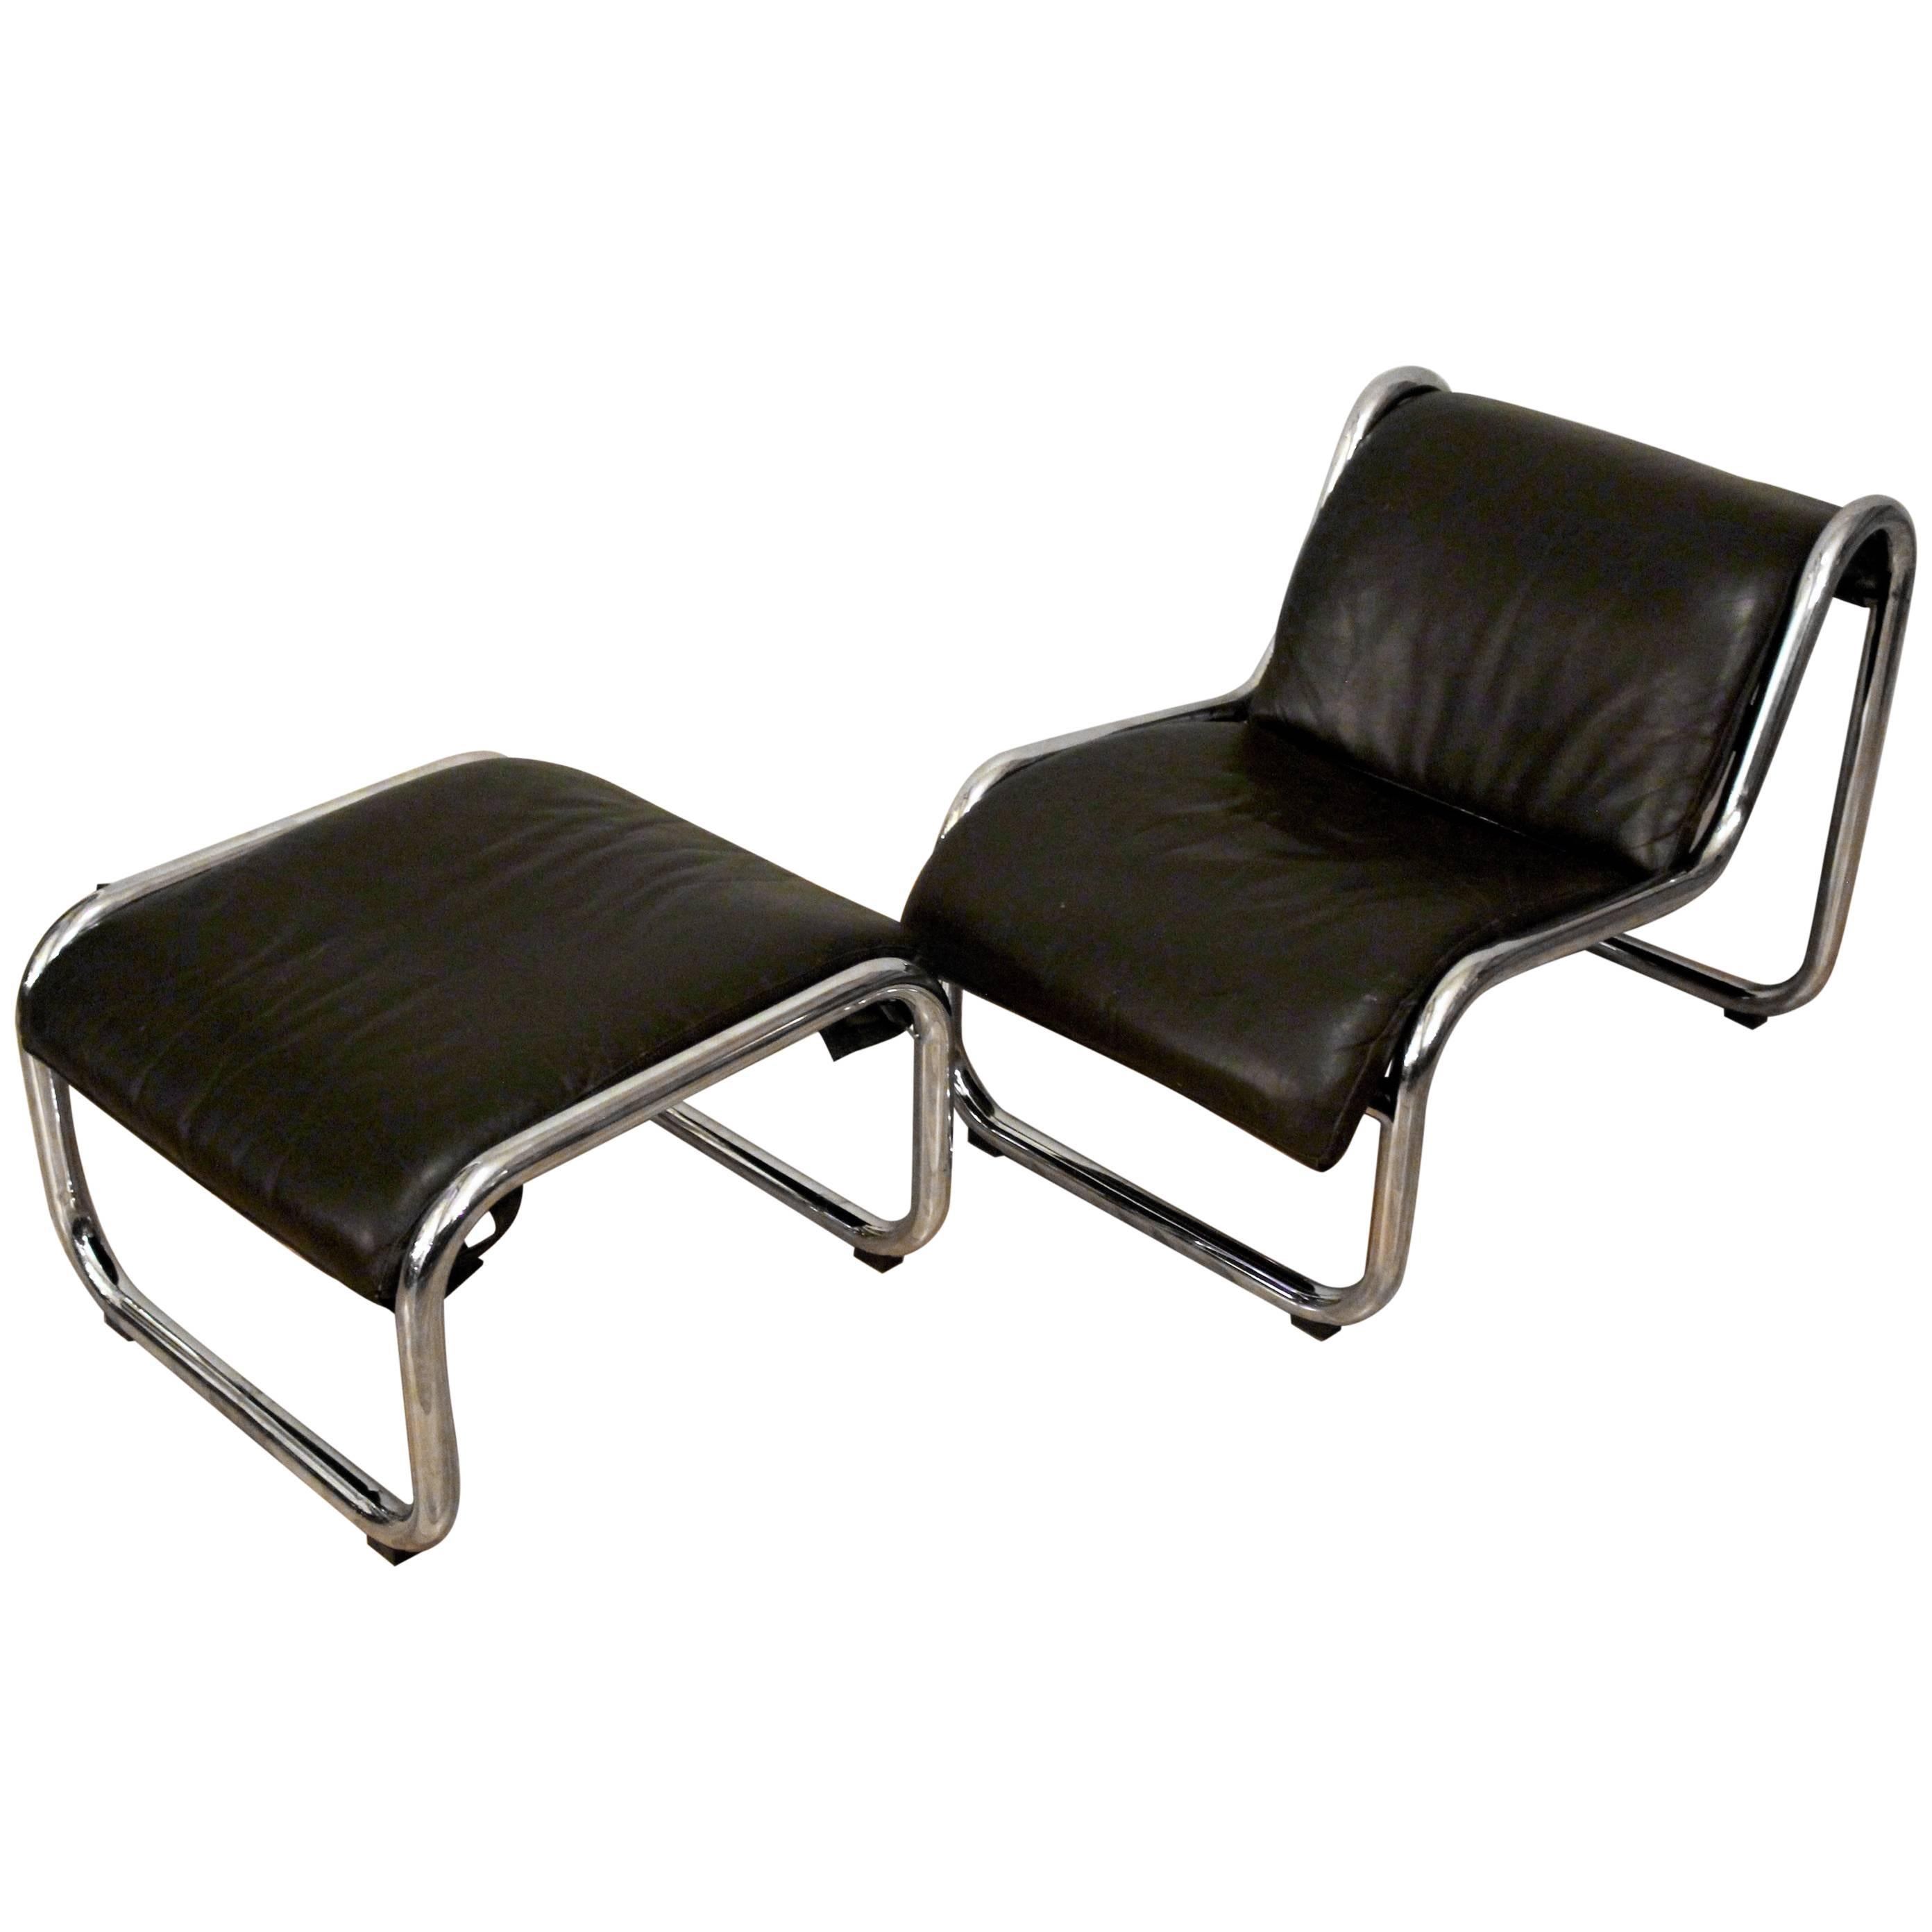 1970s Leather and Chrome Lounge Chair and Ottoman by Kinetics Furniture For Sale